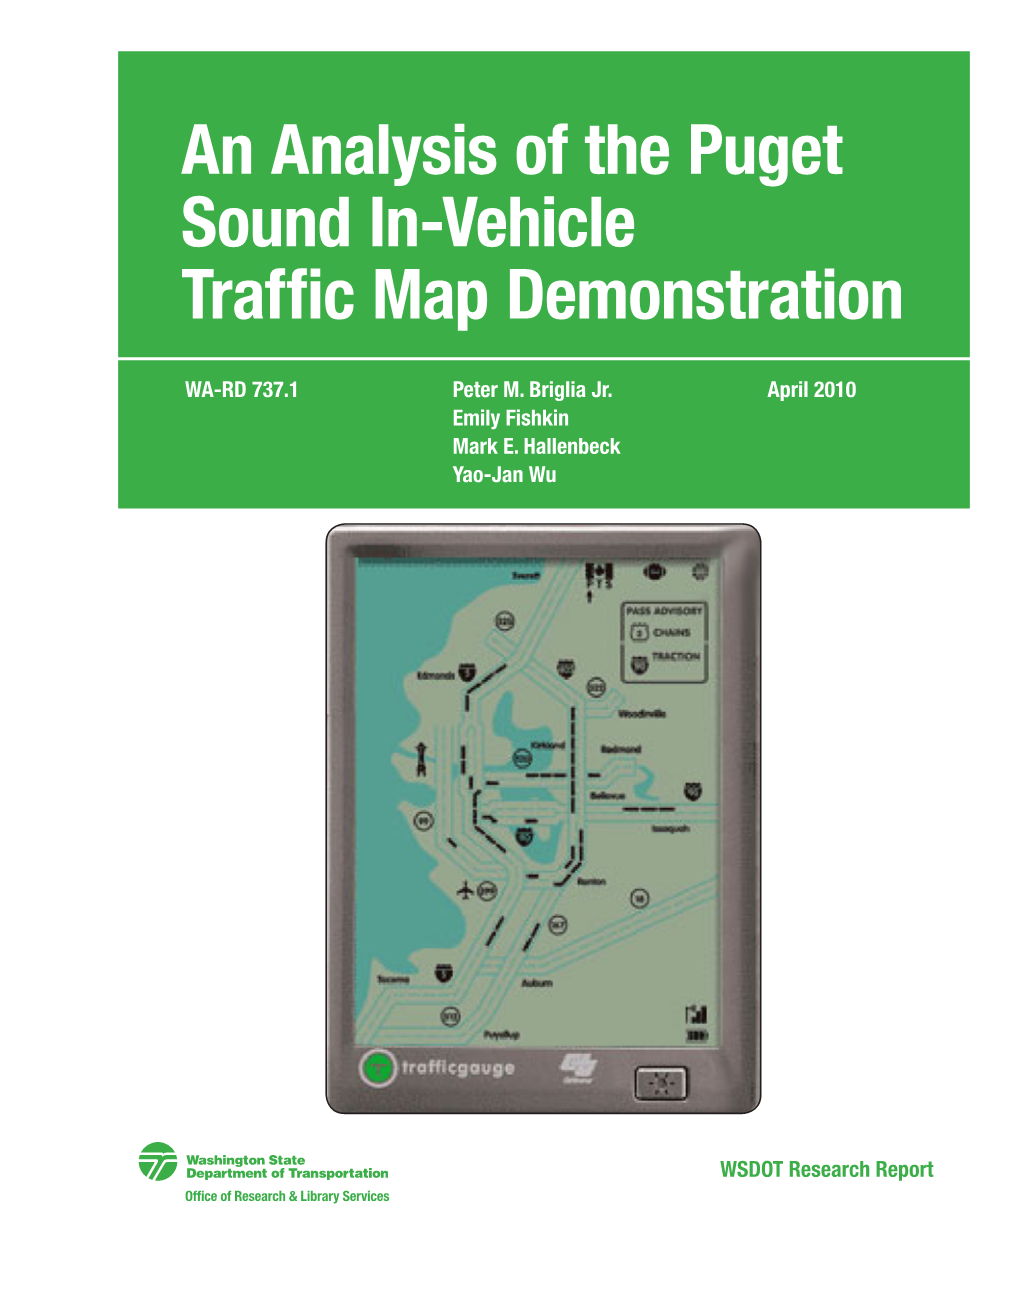 An Analysis of the Puget Sound In-Vehicle Traffic Map Demonstration